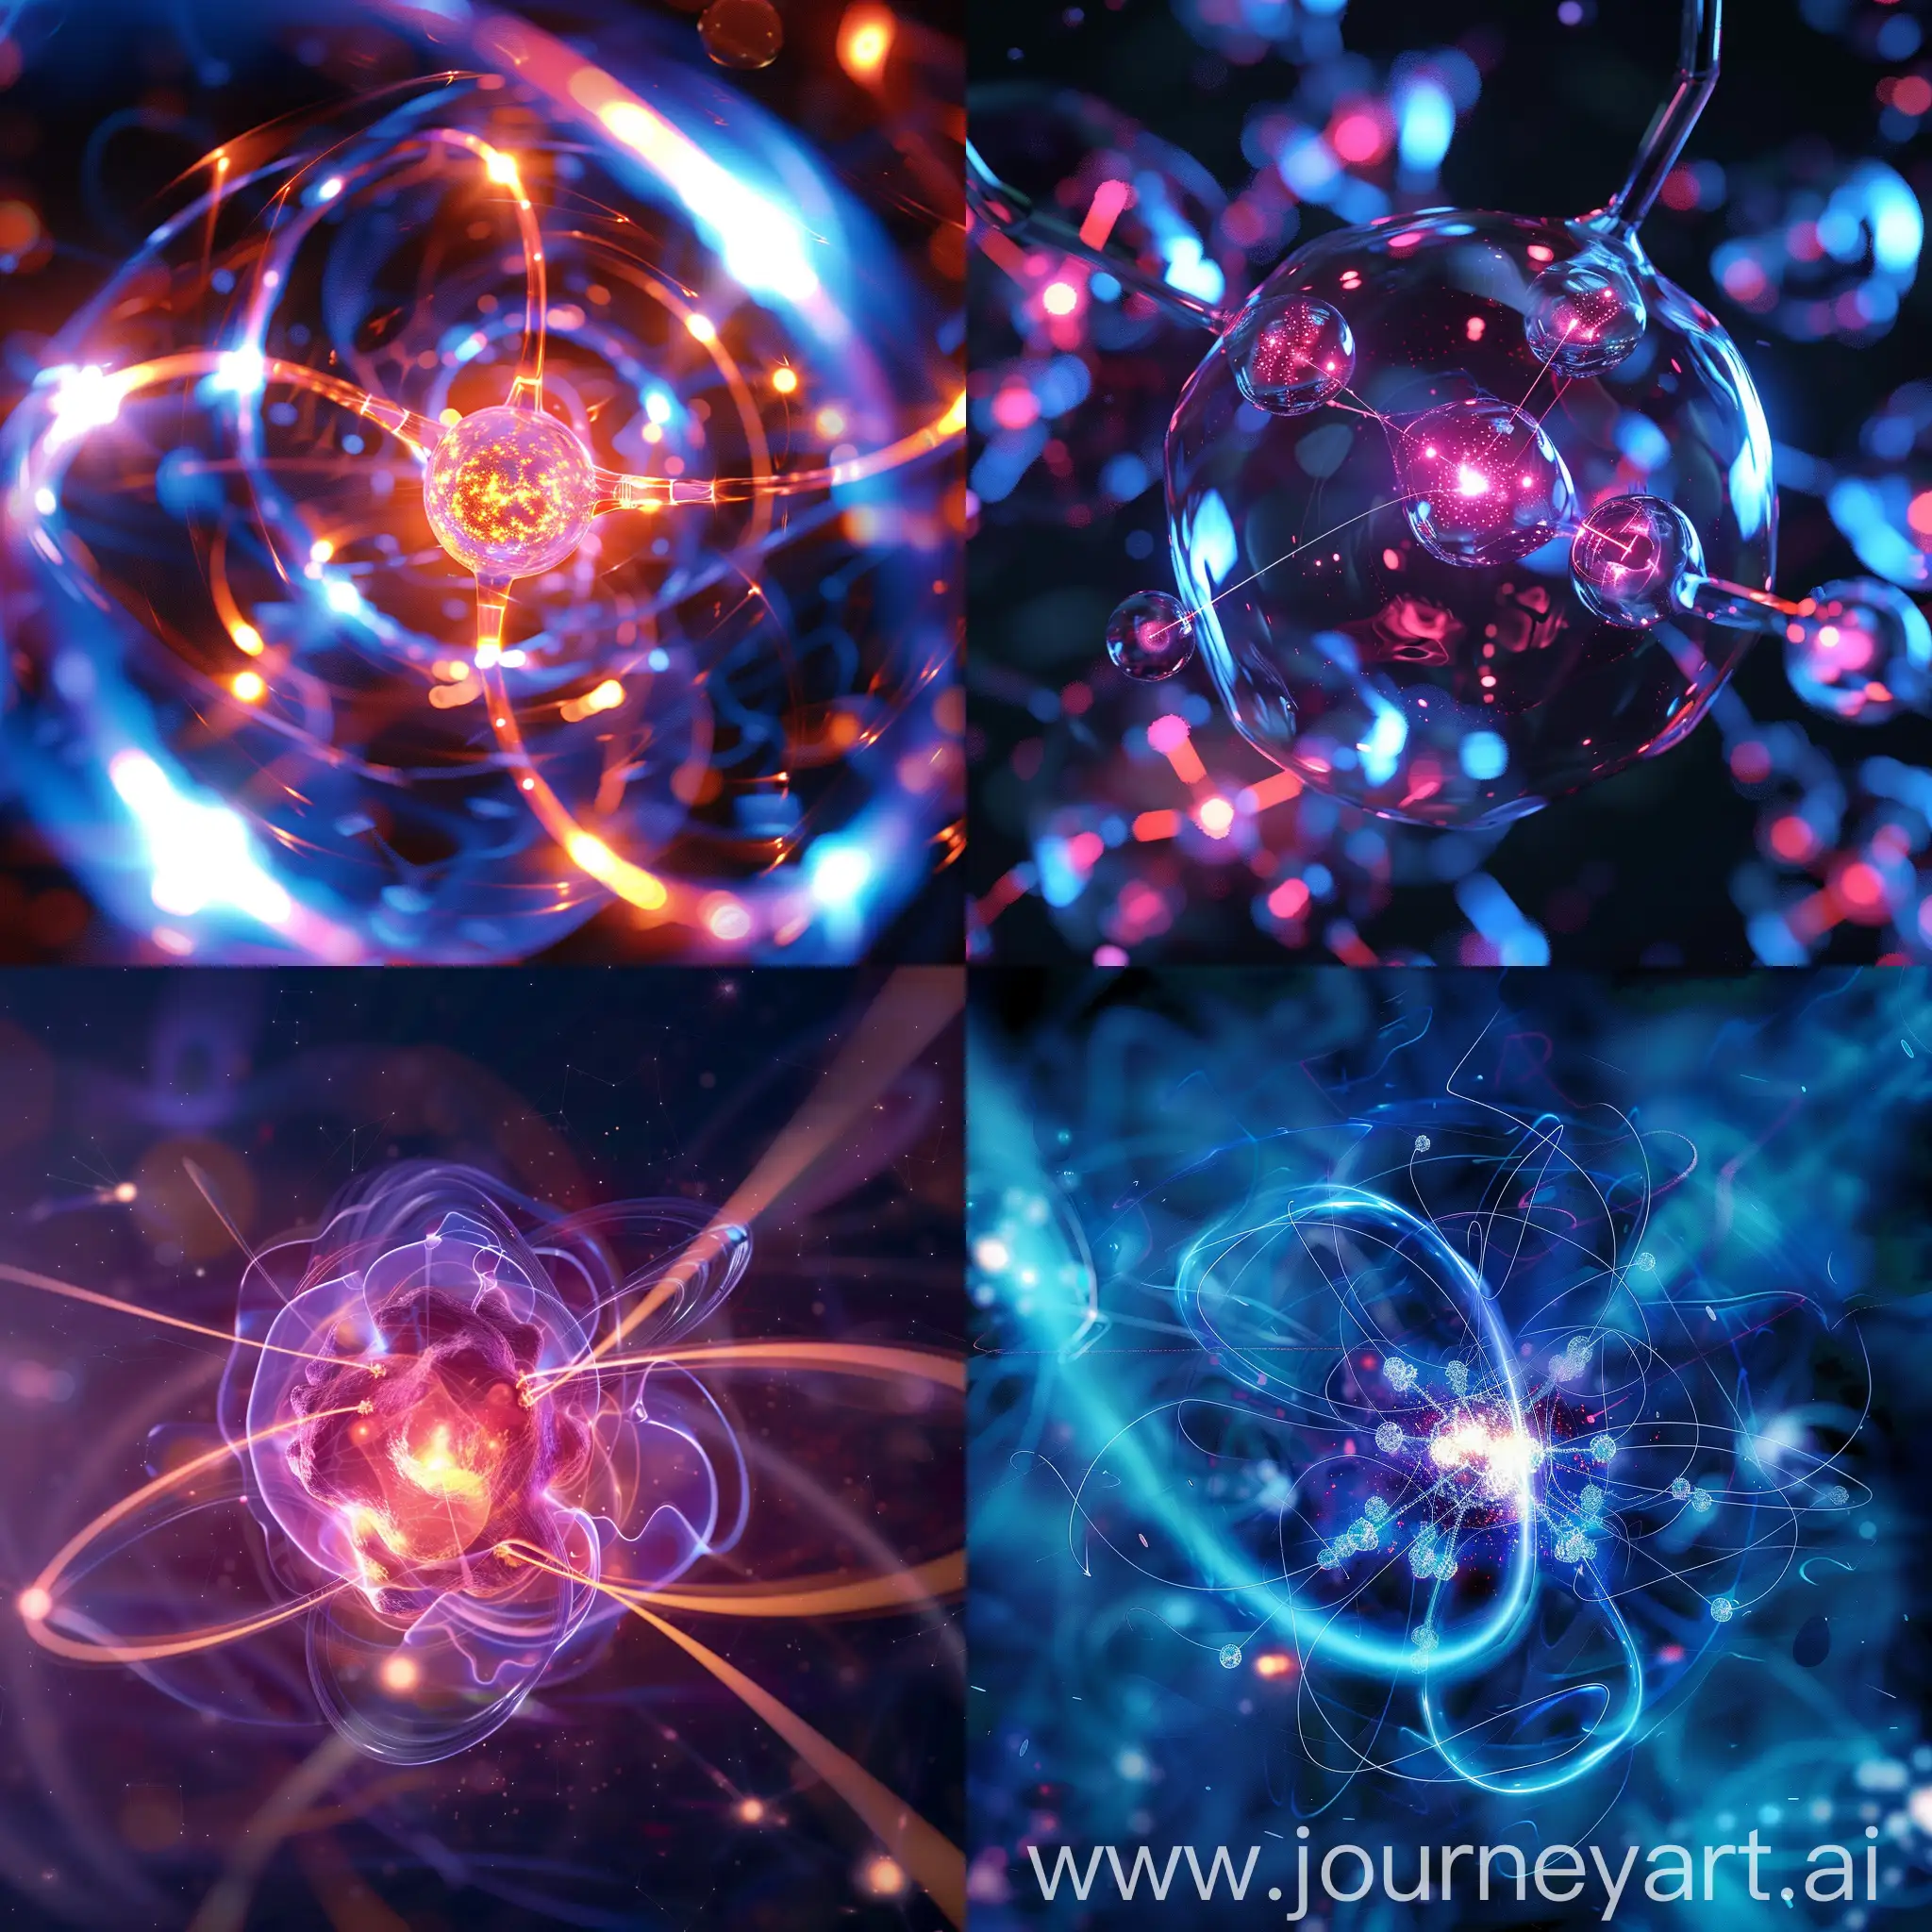 Vibrant-Electron-Dance-A-Dynamic-Visualization-of-Electrons-in-Motion